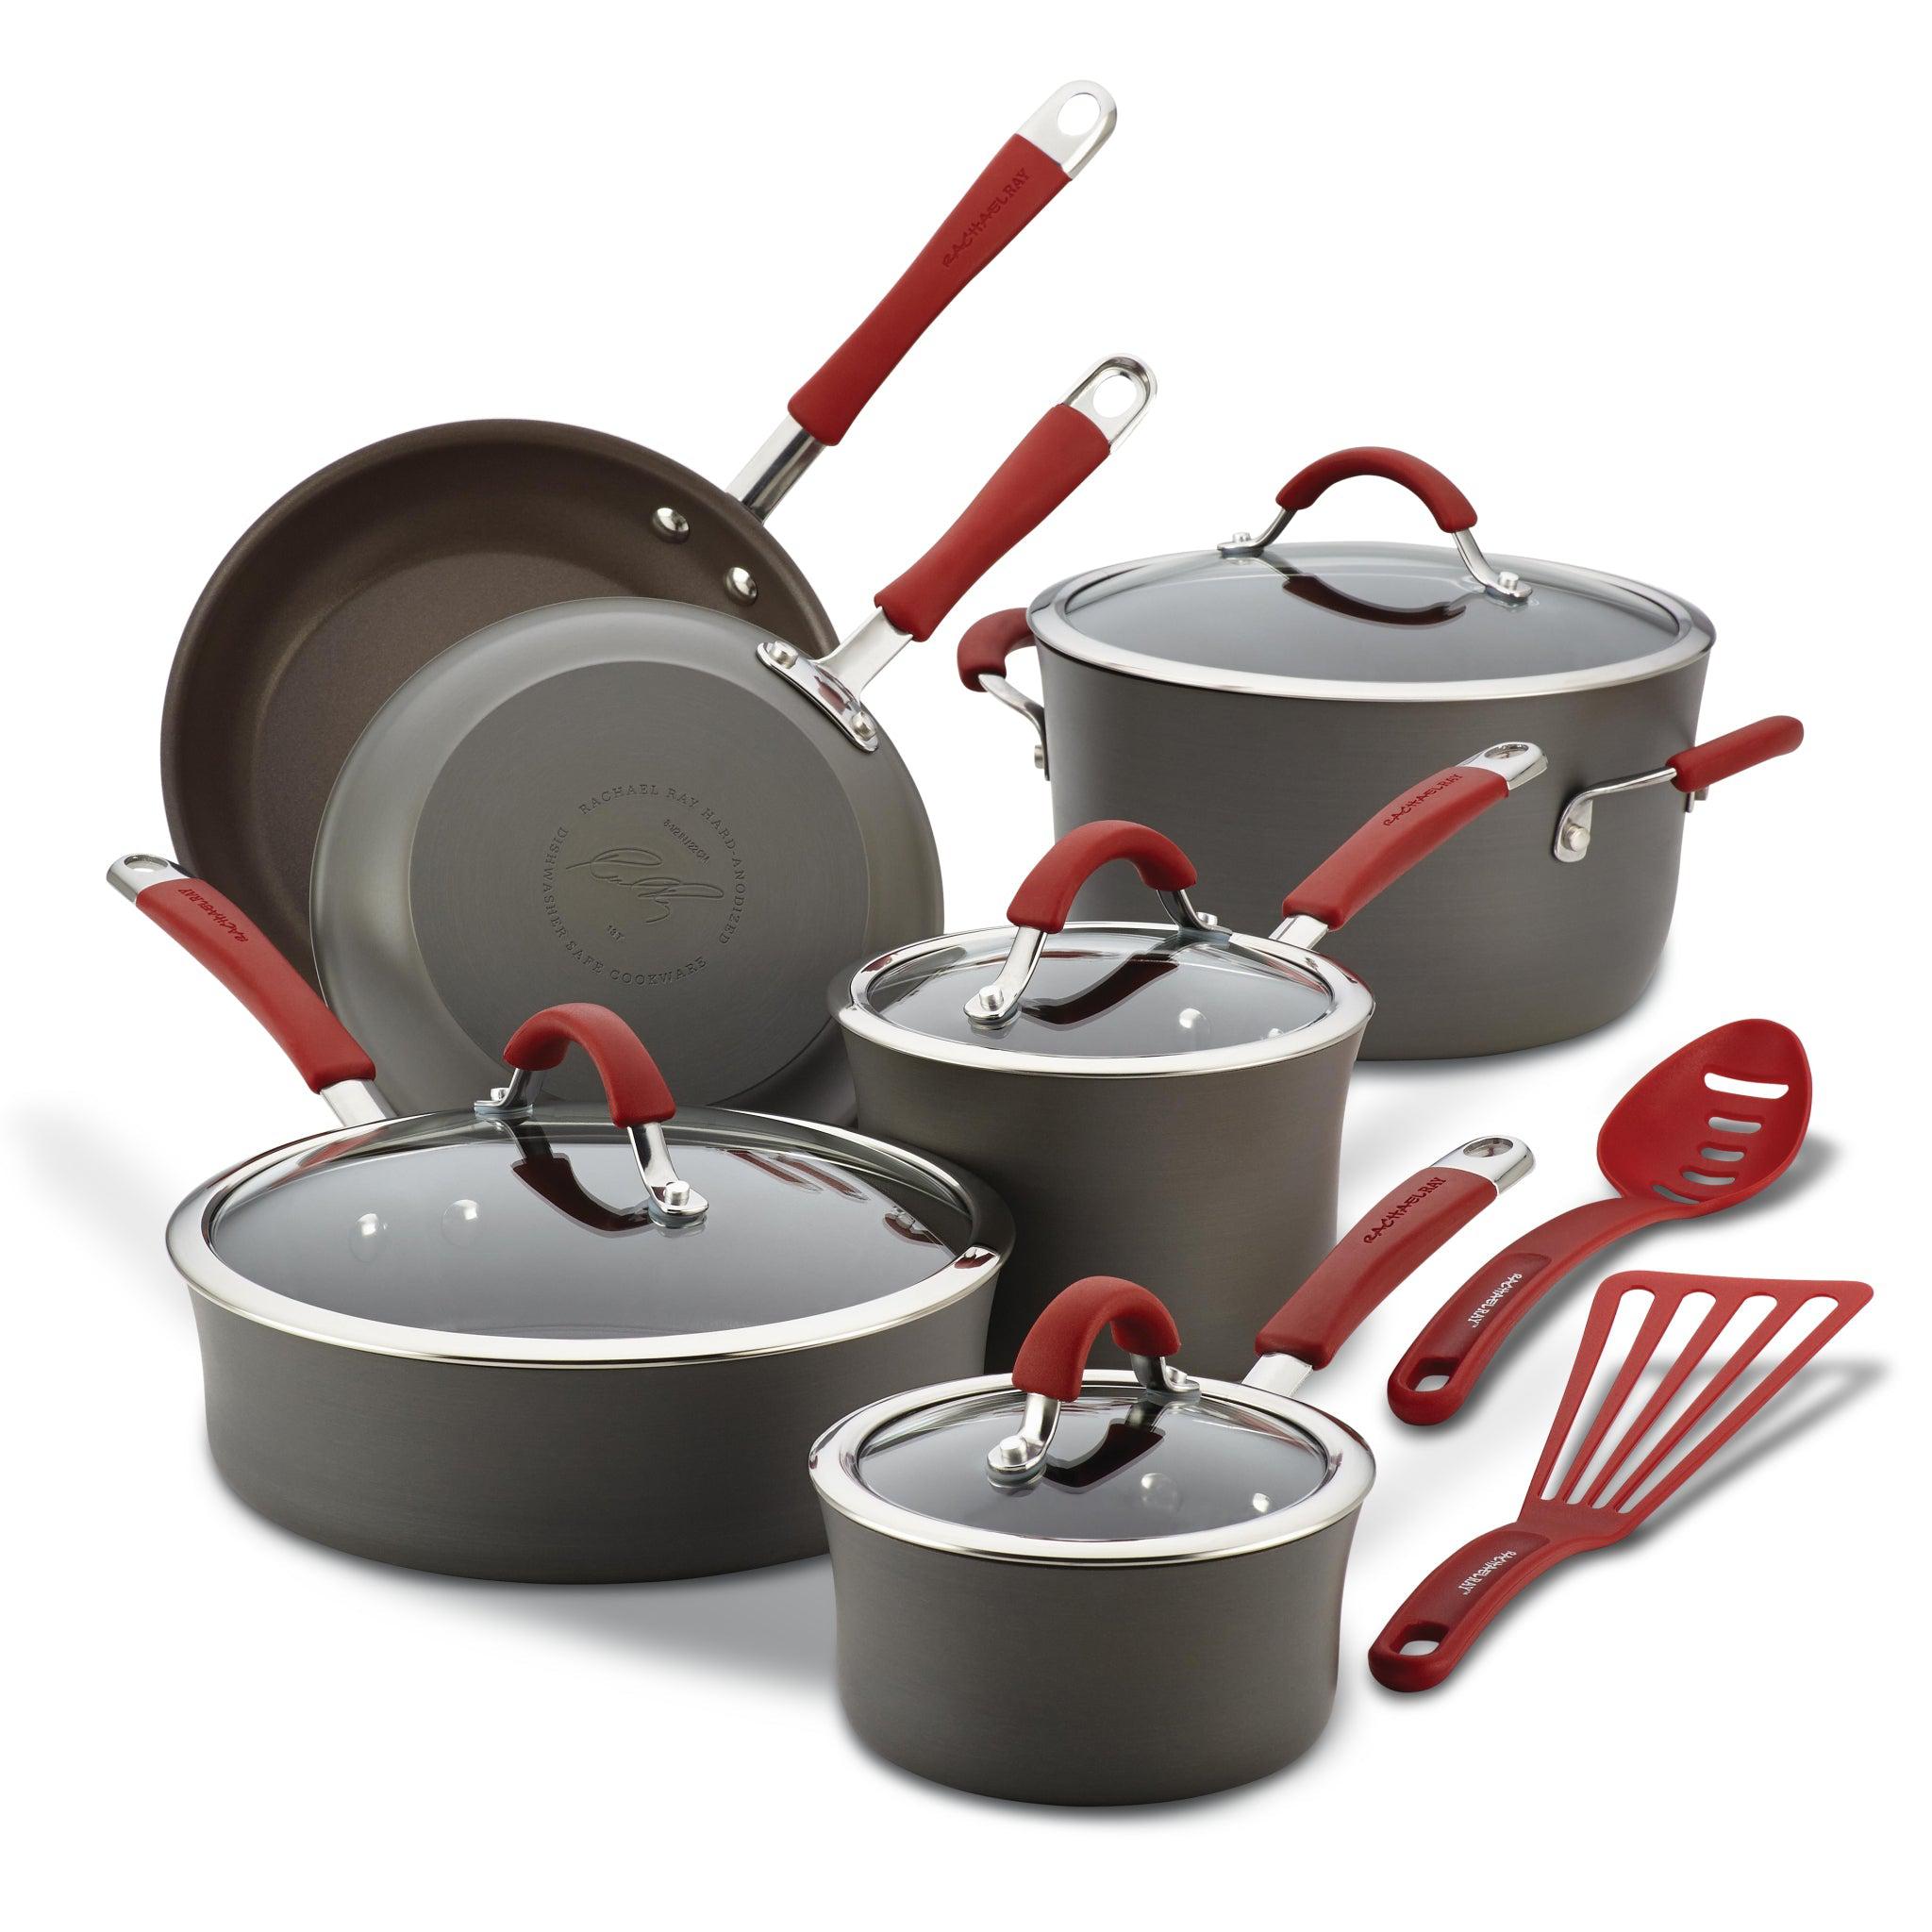 Cook N Home Pots and Pans Set Nonstick Professional Hard Anodized Cook